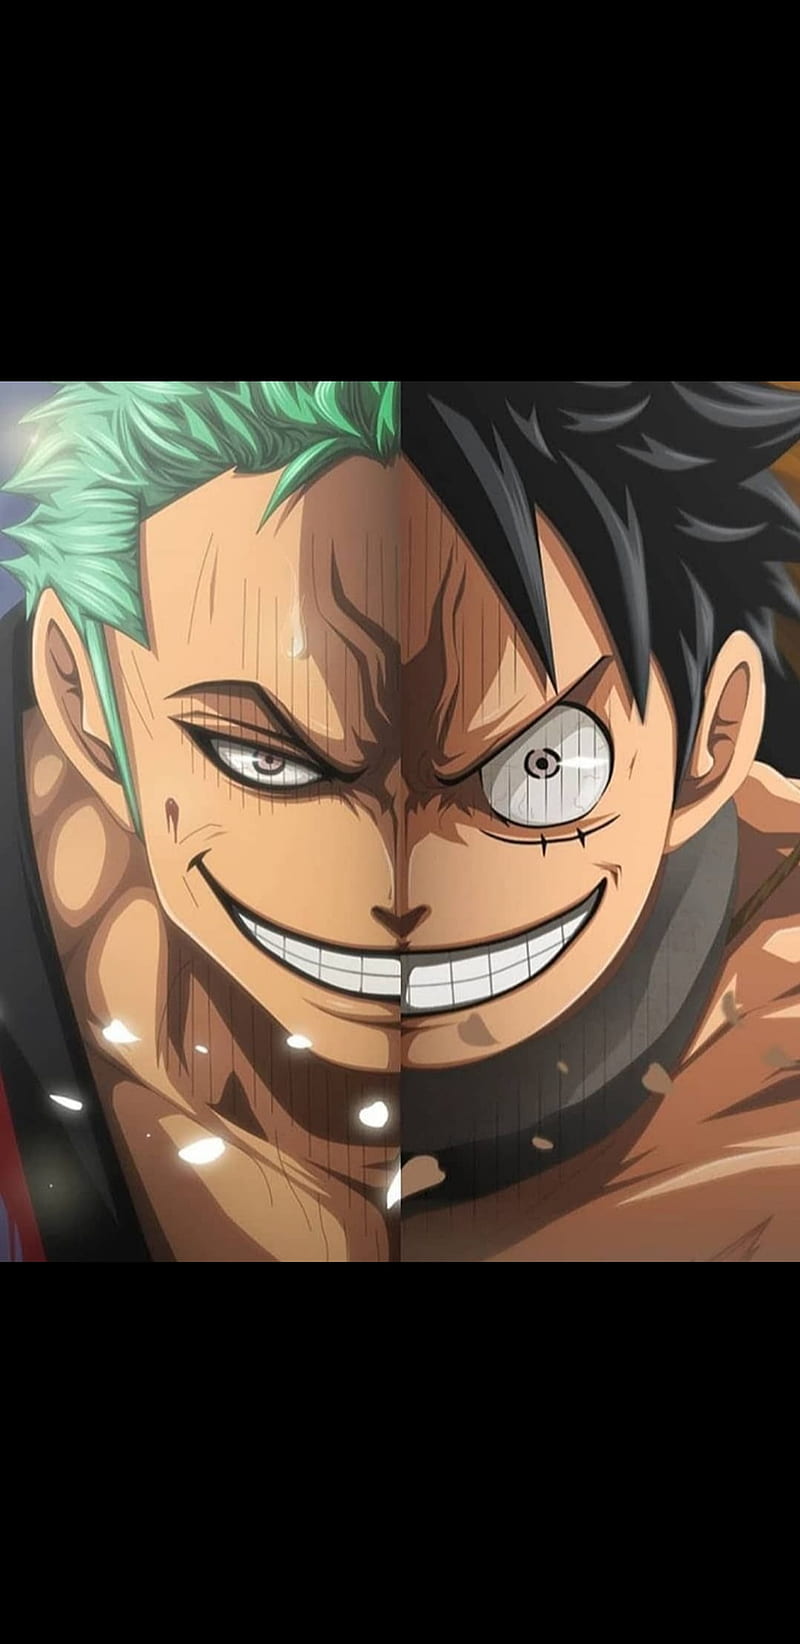 One Piece wallpapers for iPhone in 2023 Free 4k download  iGeeksBlog